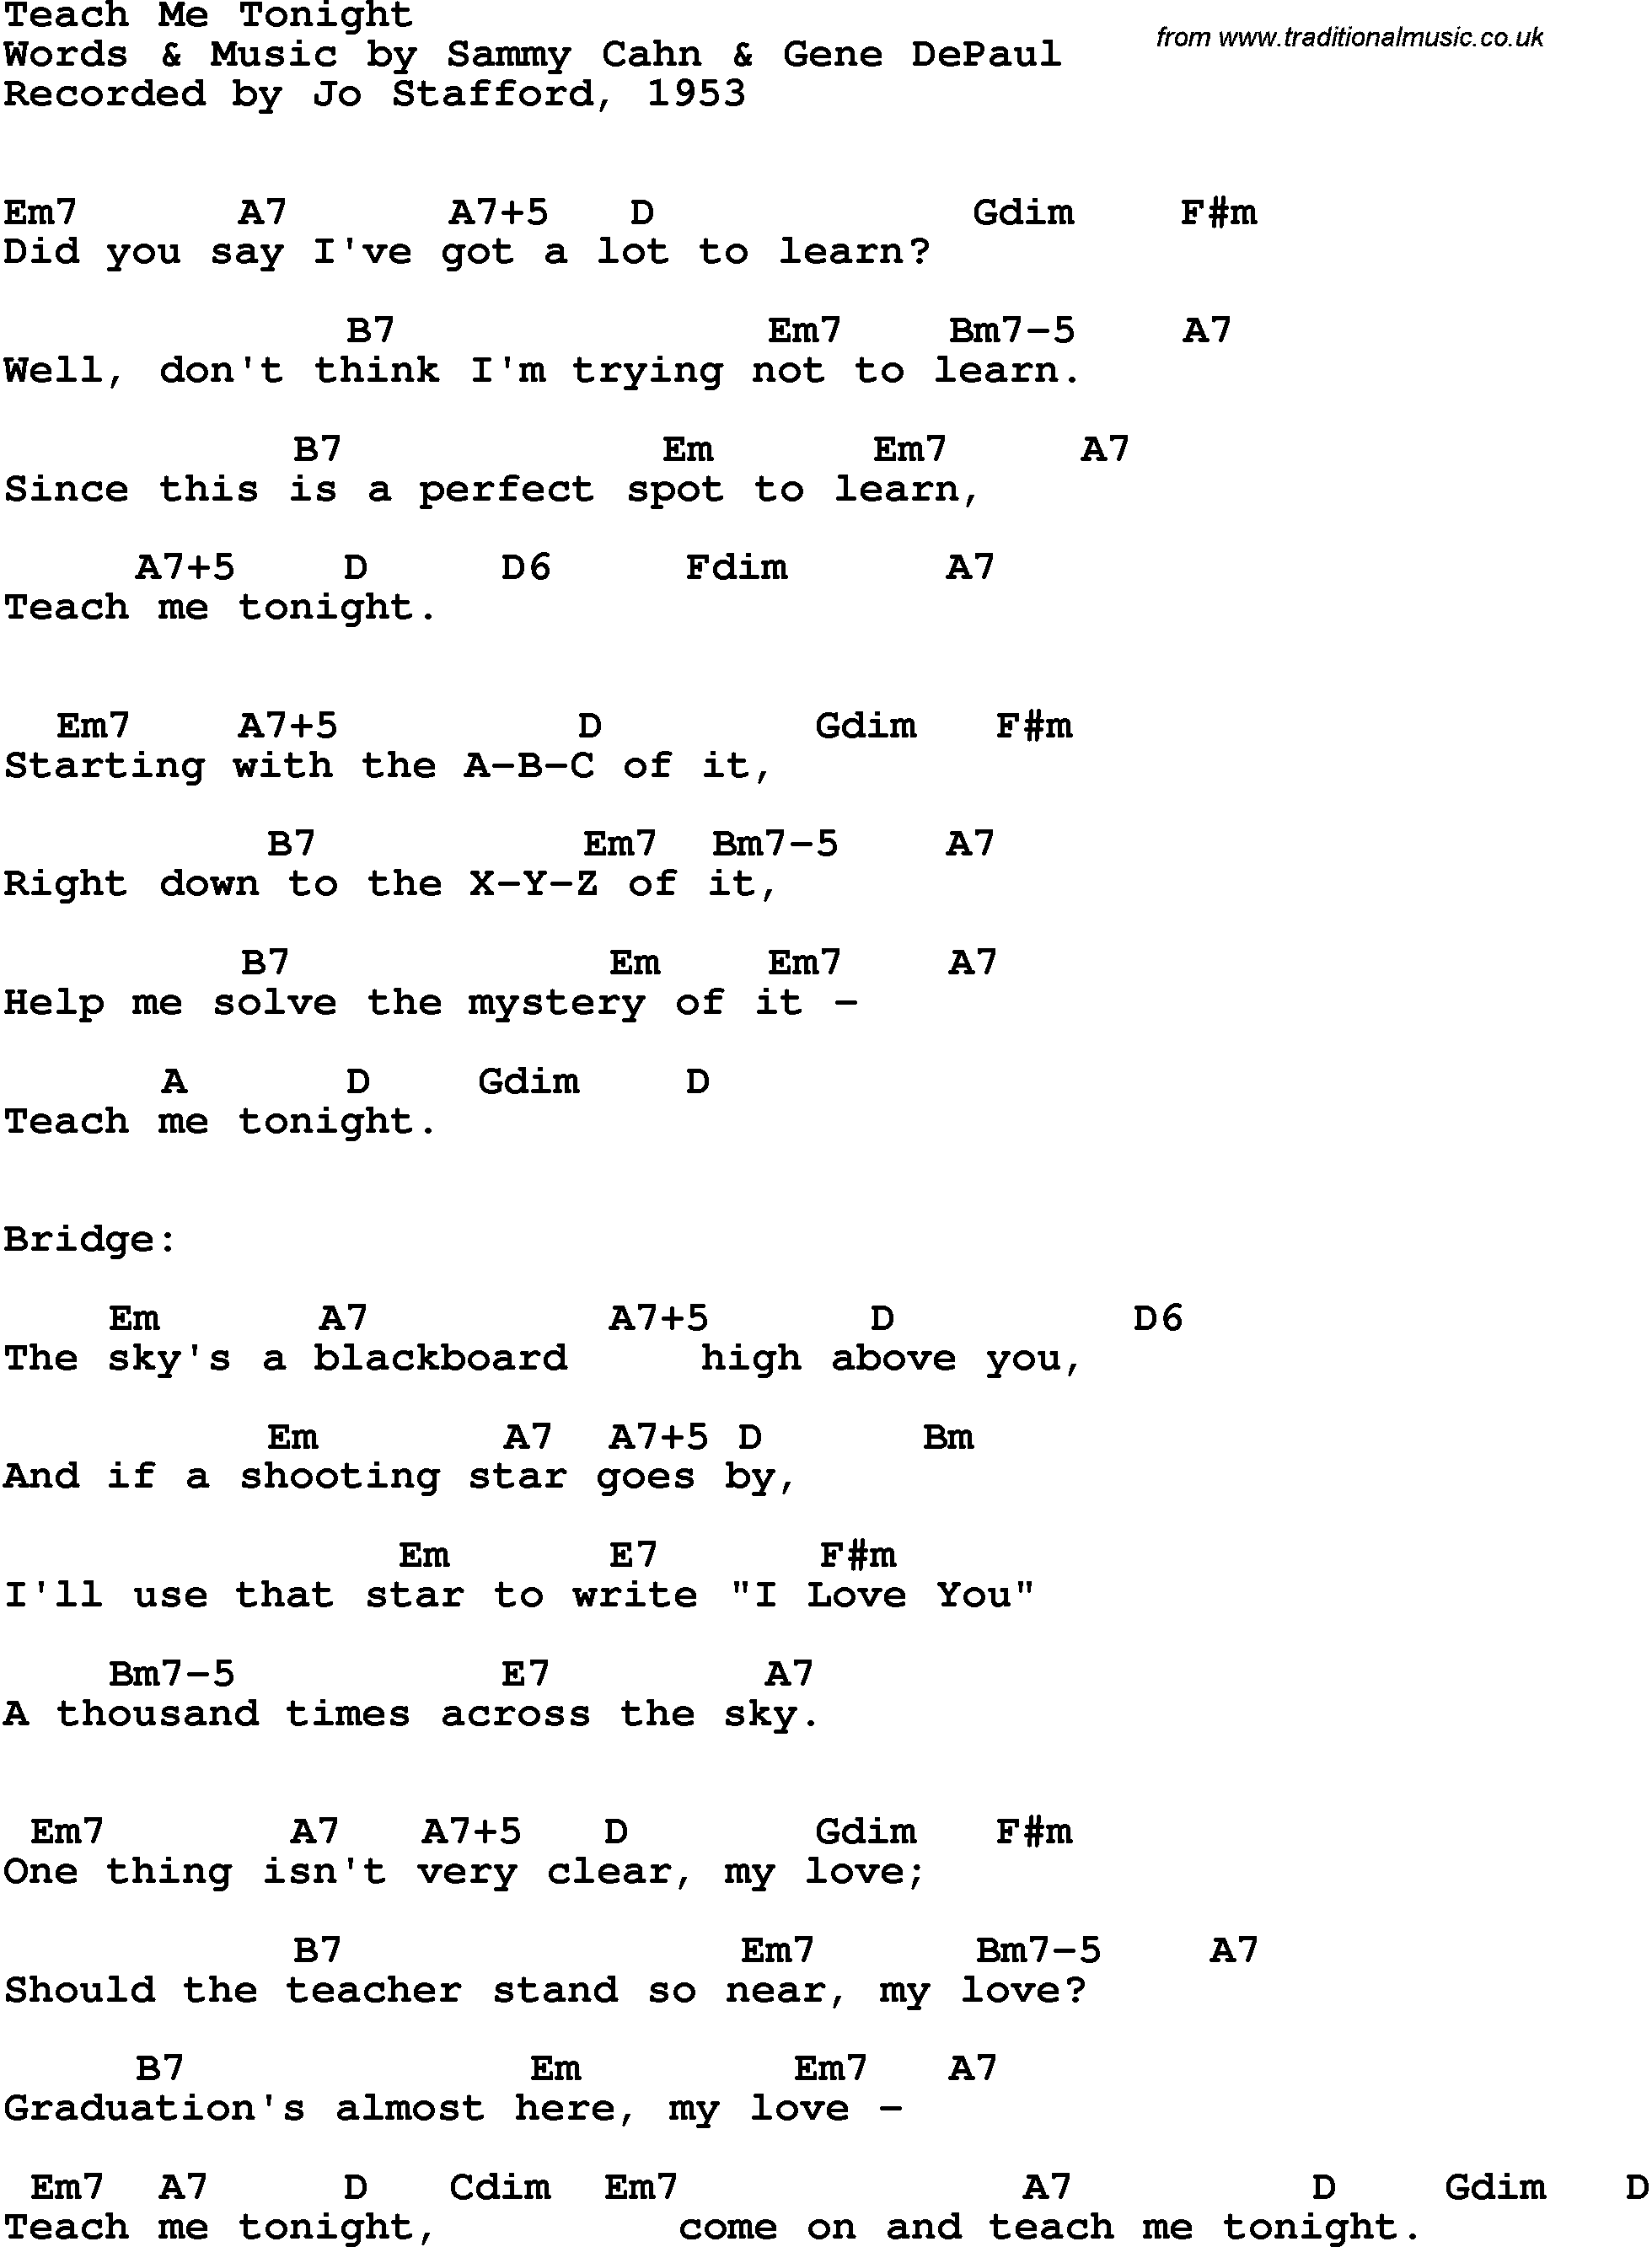 Song Lyrics with guitar chords for Teach Me Tonight - Jo Stafford, 1953